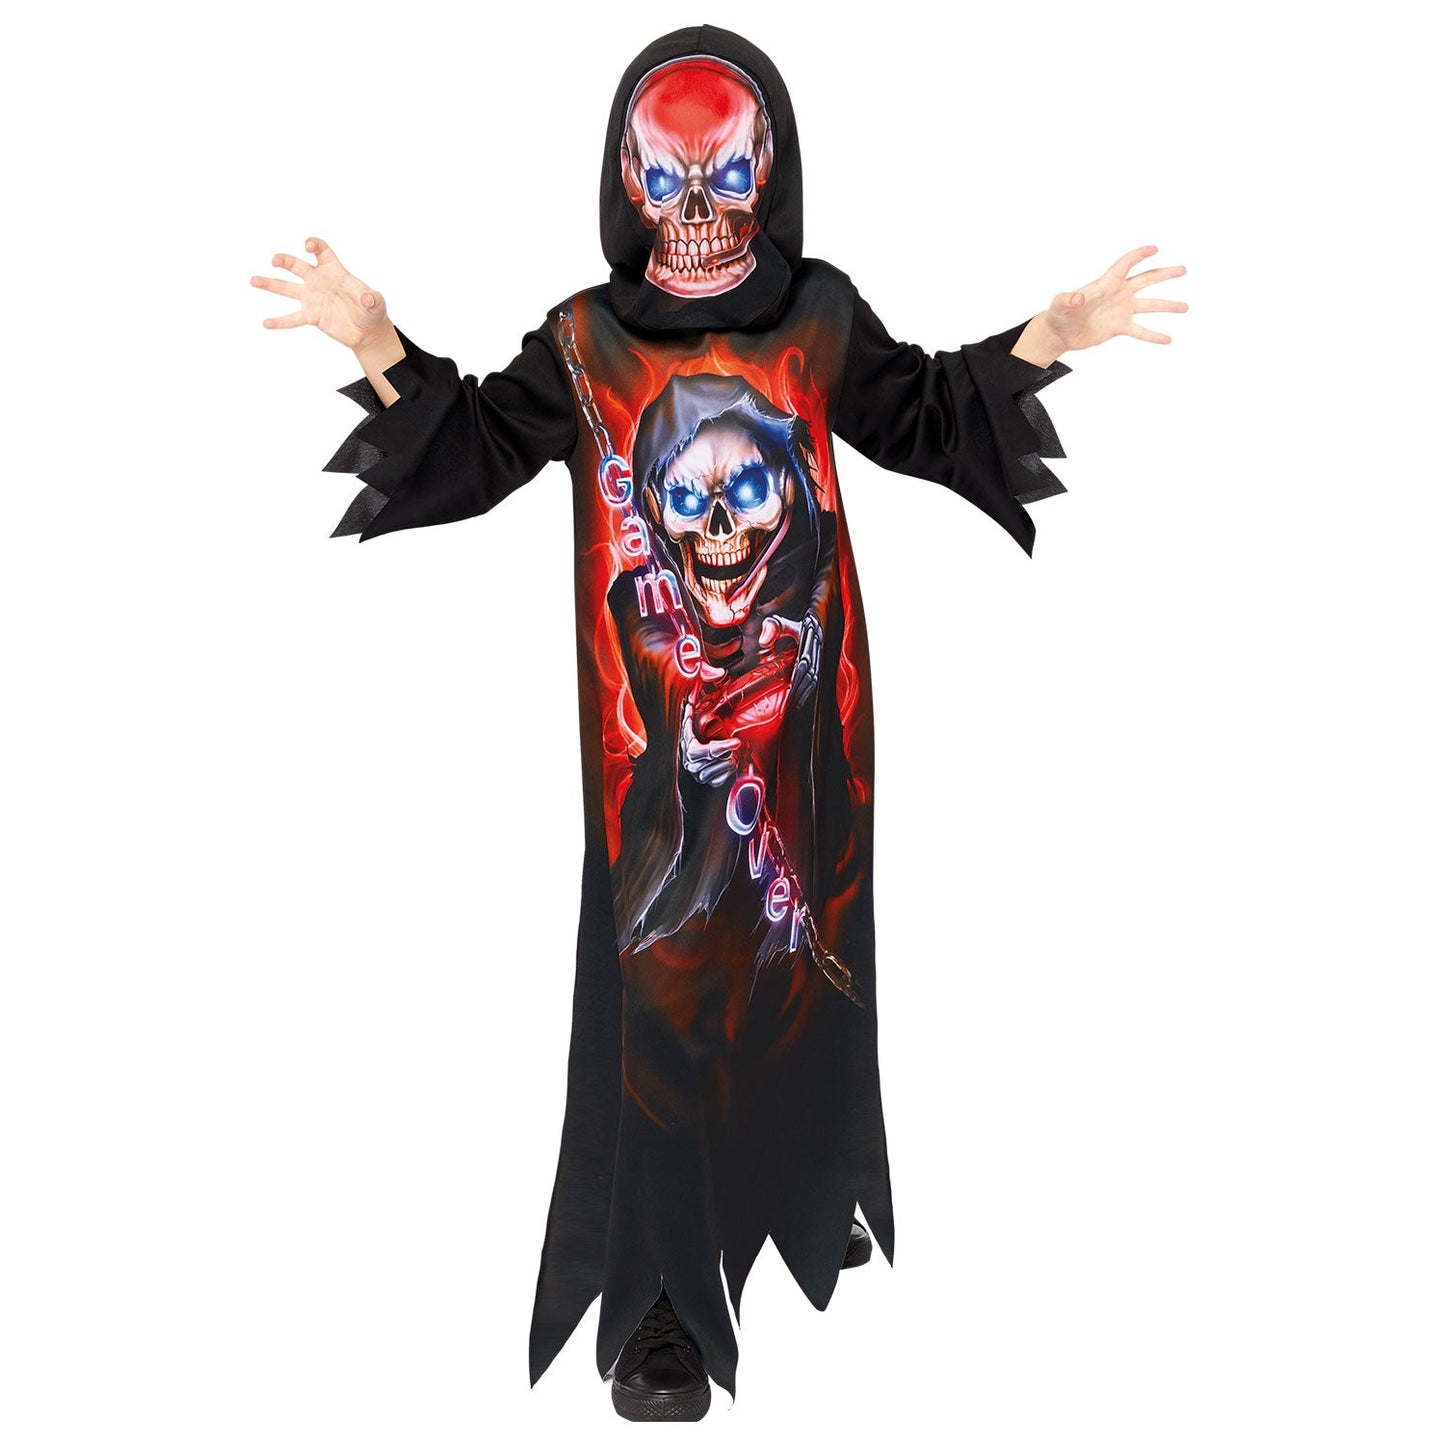 Gaming Reaper Costume includes, robe and mask